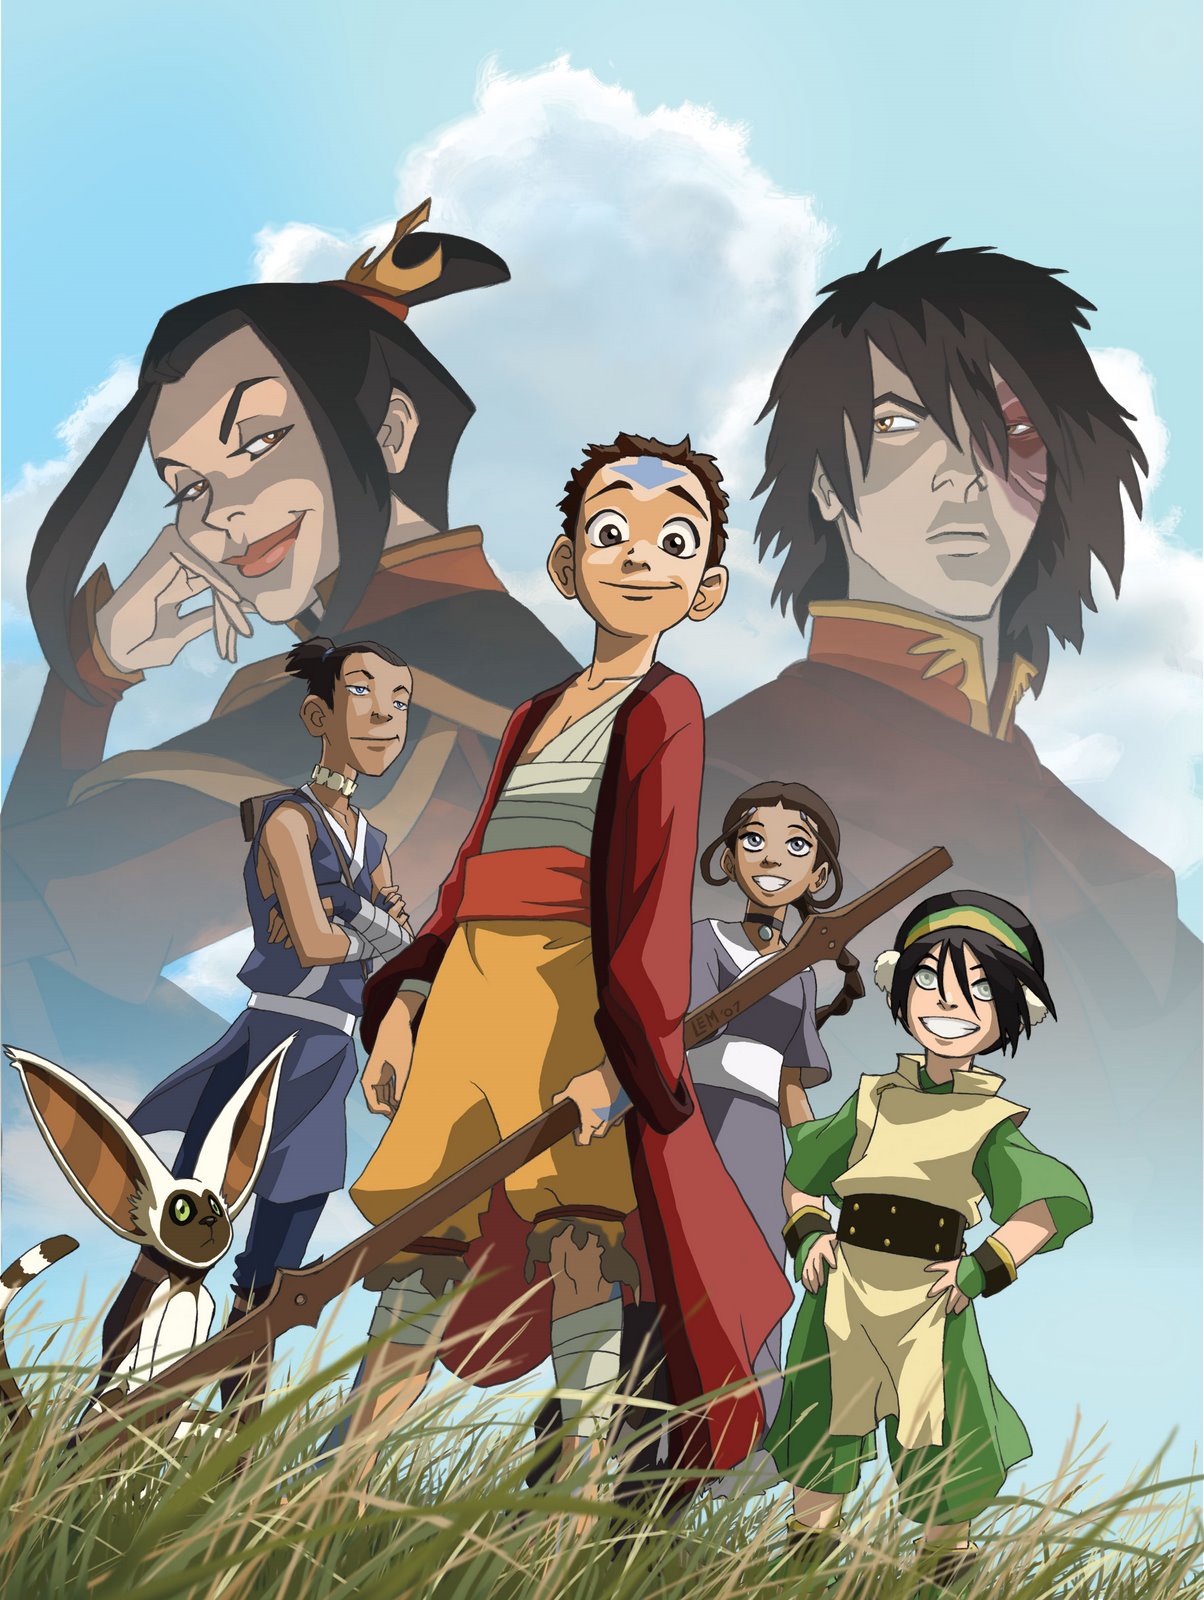 AVATAR THE LAST AIRBENDER Series Coming to Bluray